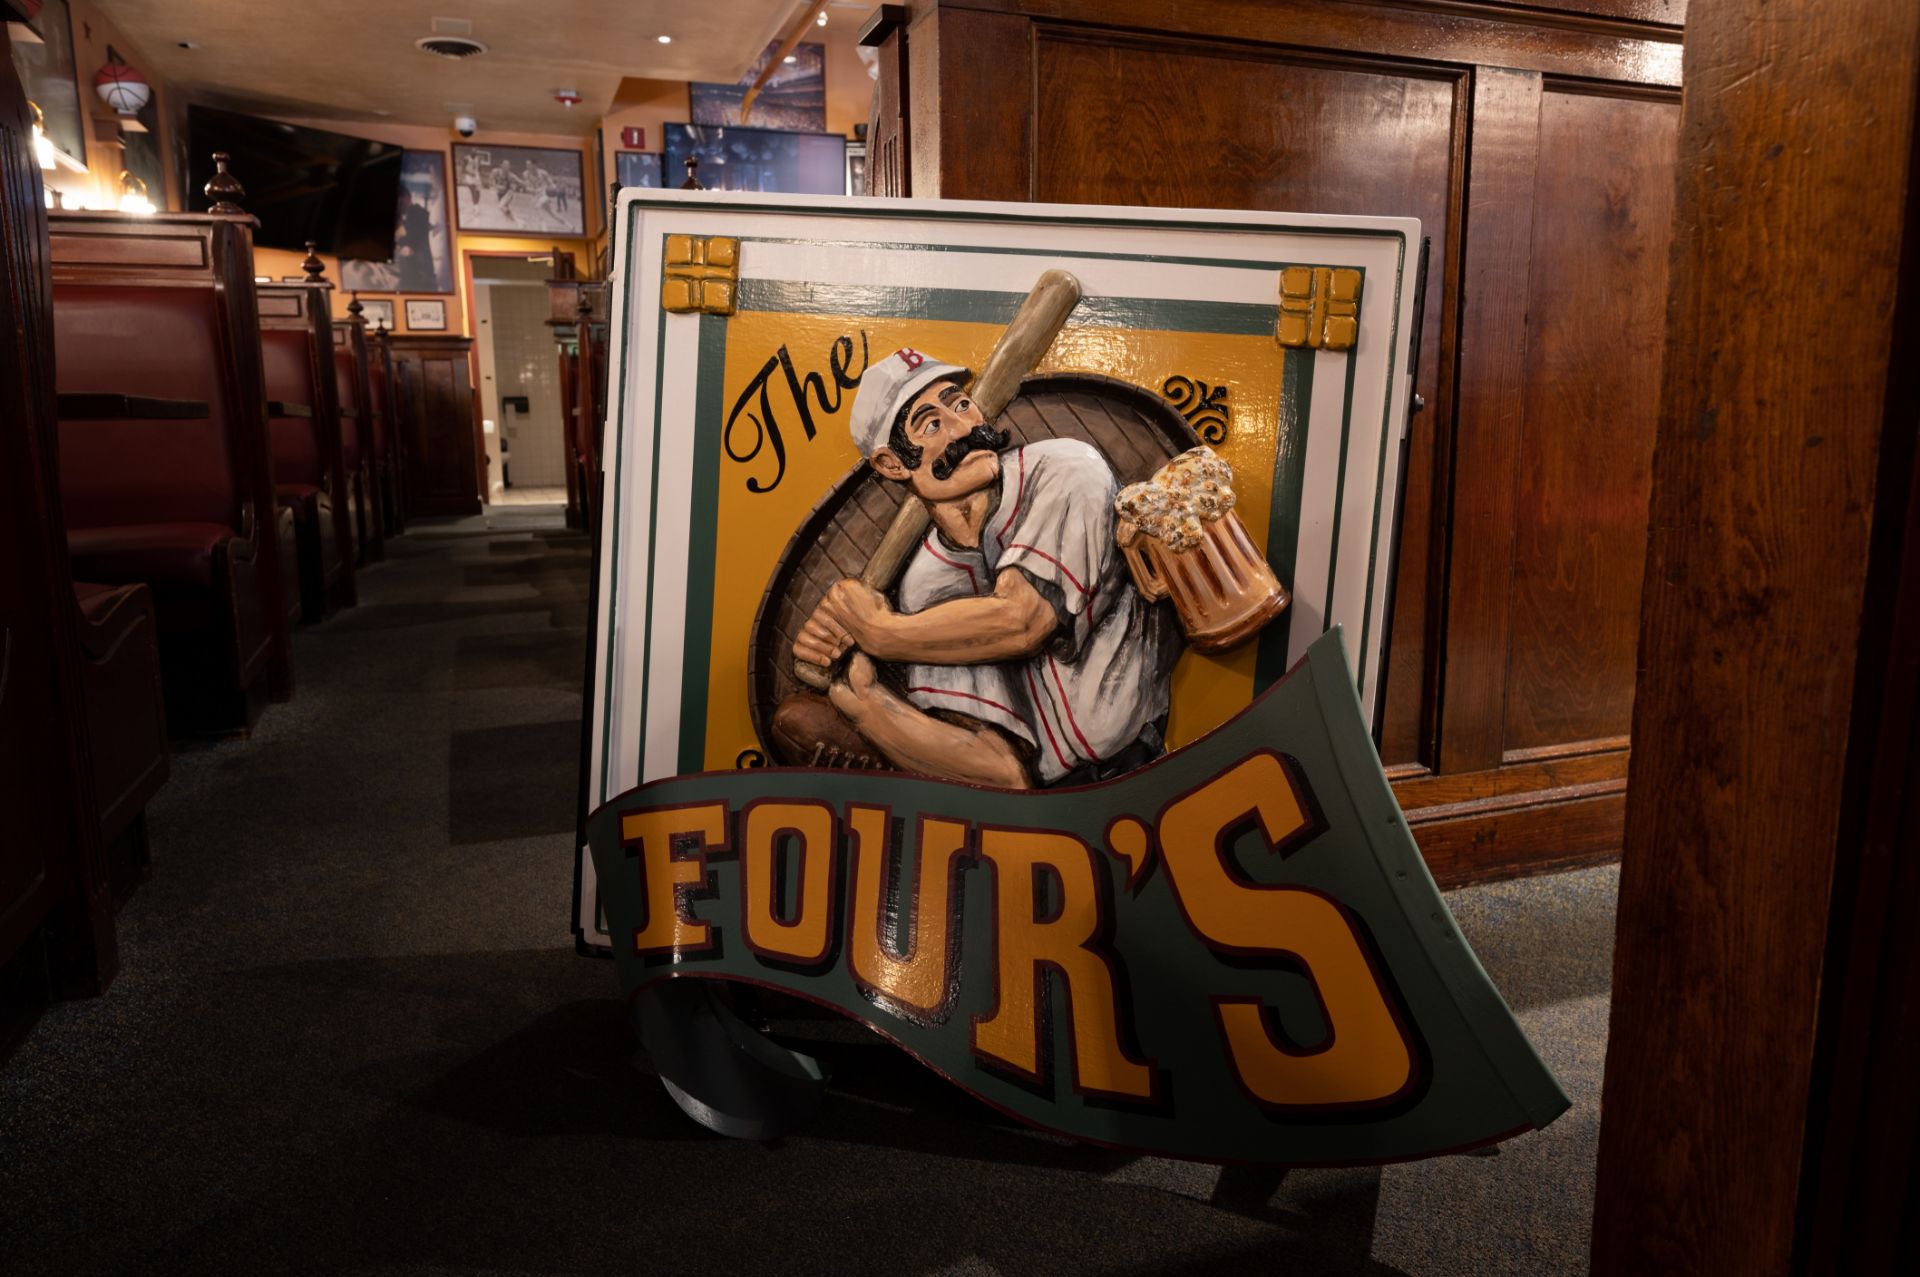 3D Double Sided Exterior Sign "The Fours" 36"x38" (COMES WITH MOUNT AND IS ALREADY OFF THE BUILDING) - Image 2 of 4